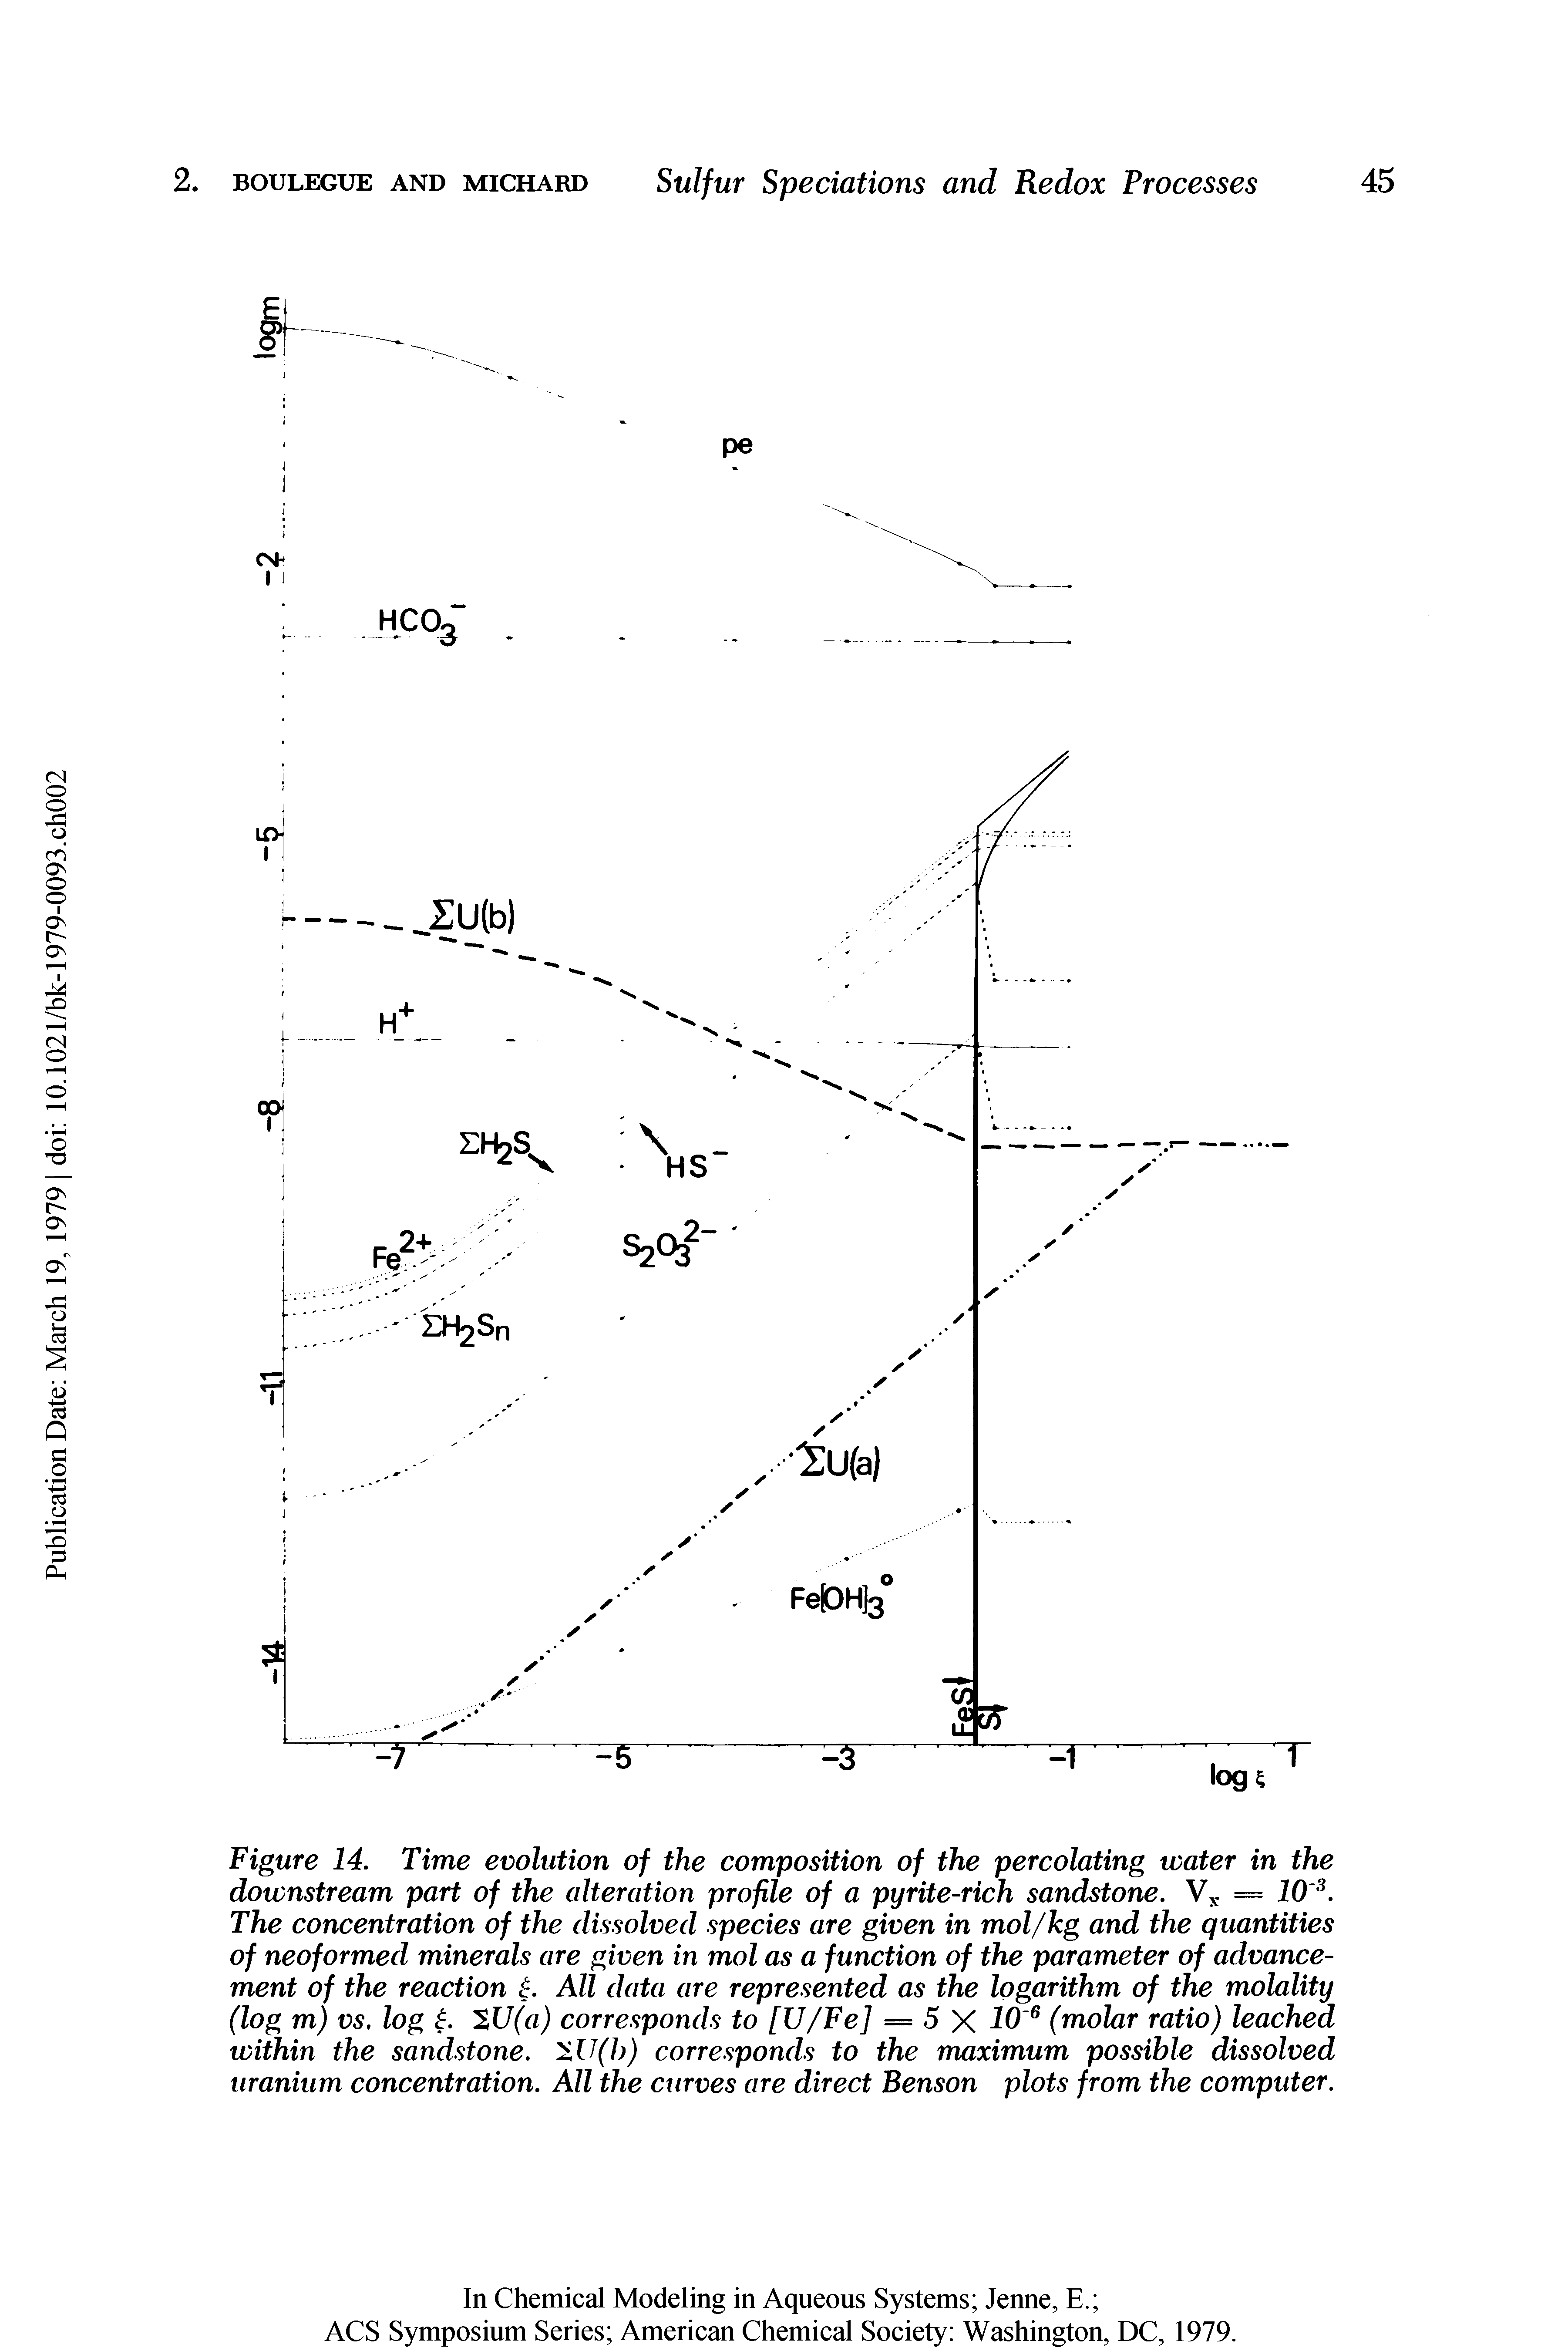 Figure 14. Time evolution of the composition of the percolating water in the downstream part of the alteration profile of a pyrite-rich sandstone. = 10. The concentration of the dissolved species are given in mol/kg and the quantities of neoformed minerals are given in mol as a function of the parameter of advancement of the reaction t All data are represented as the logarithm of the molality (log m) vs. log. XU(a) corresponds to [U/Fe] = 5 X 10 (molar ratio) leached within the sandstone. U(l)) corresponds to the maximum possible dissolved uranium concentration. All the curves are direct Benson plots from the computer.